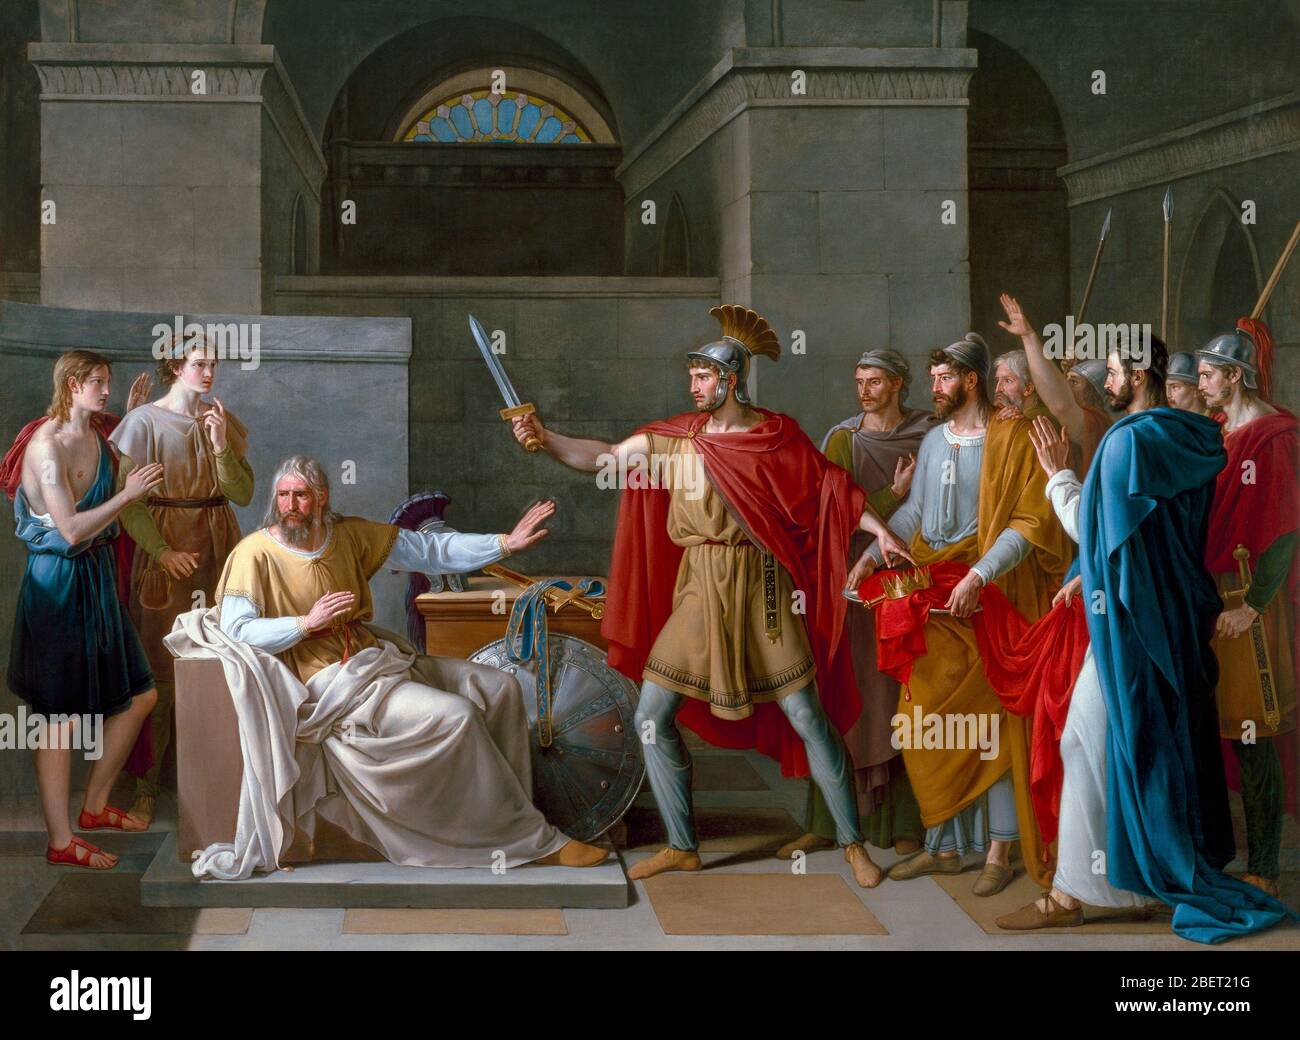 Neoclassical painting of the Visigoth king Wamba renouncing the crown. Stock Photo